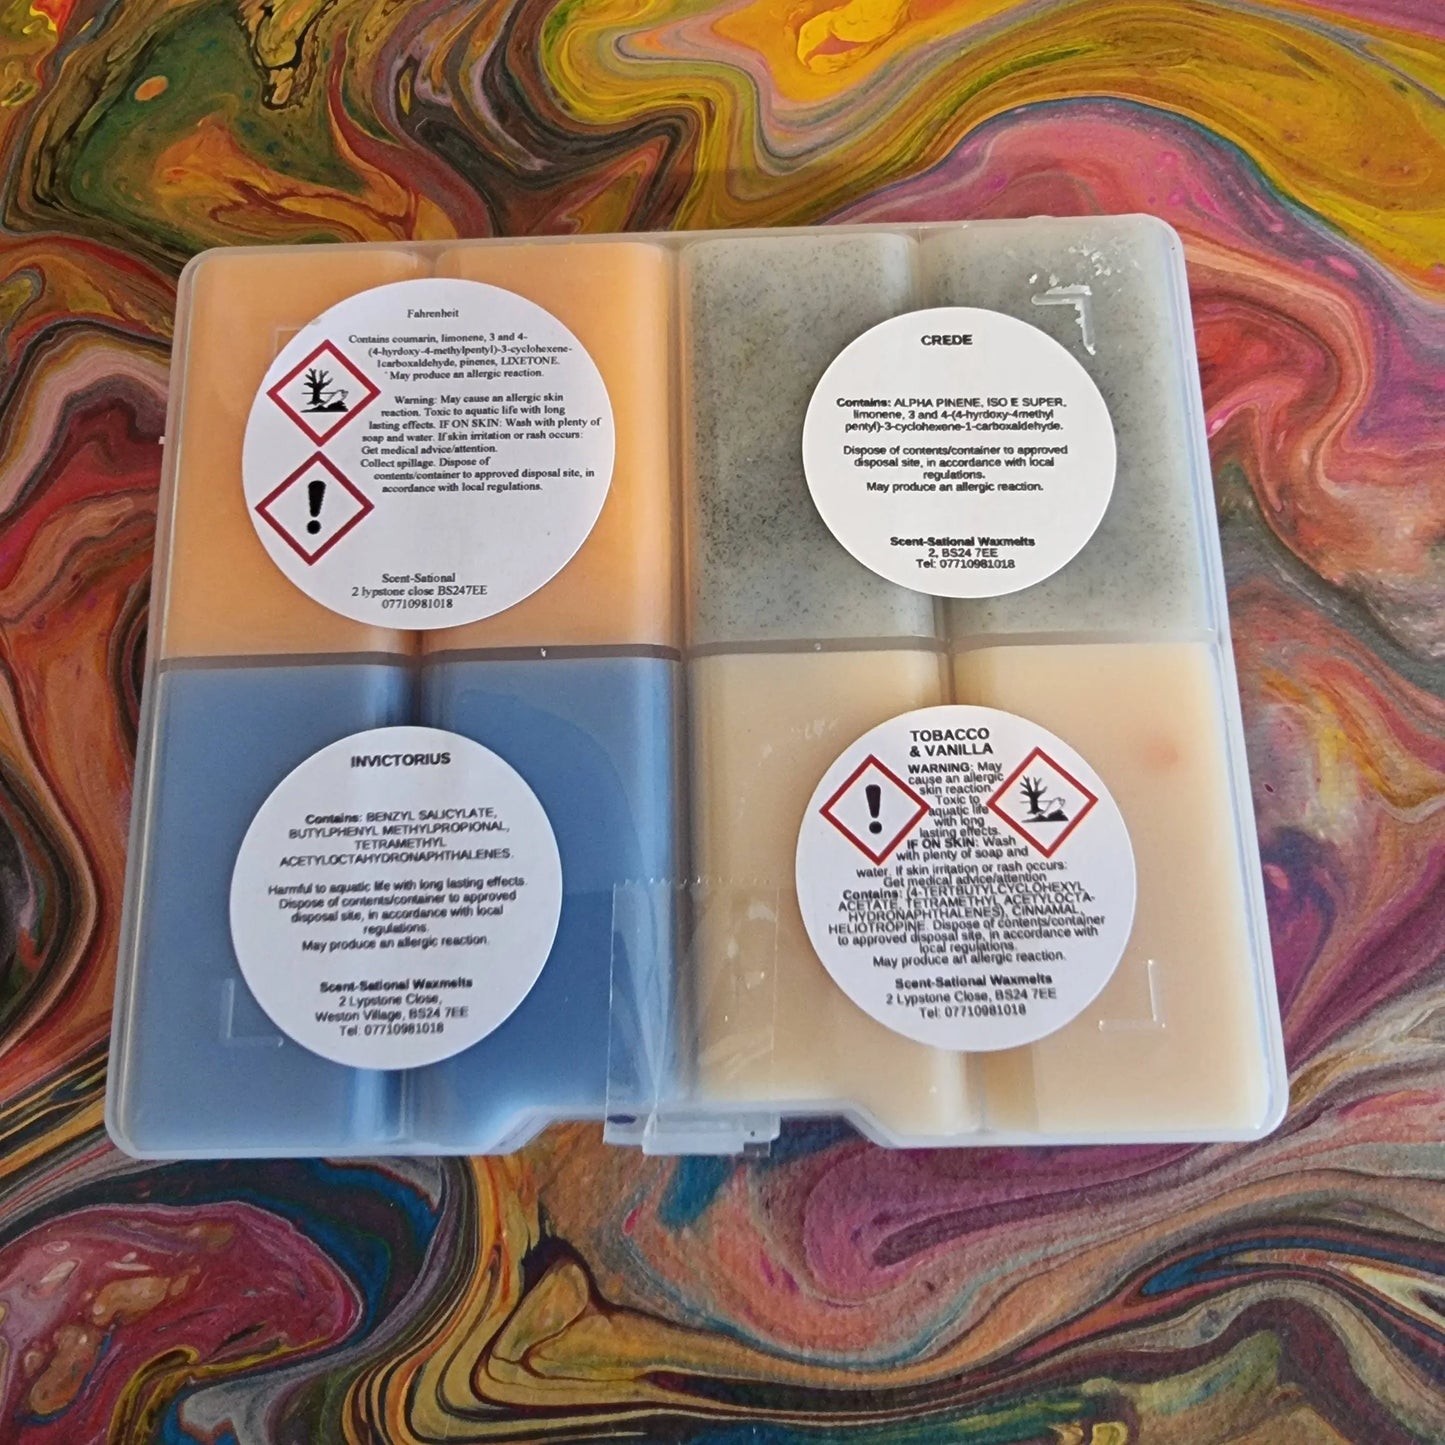 Aftershave Wax Melts Collection Scent Sational Wax melts